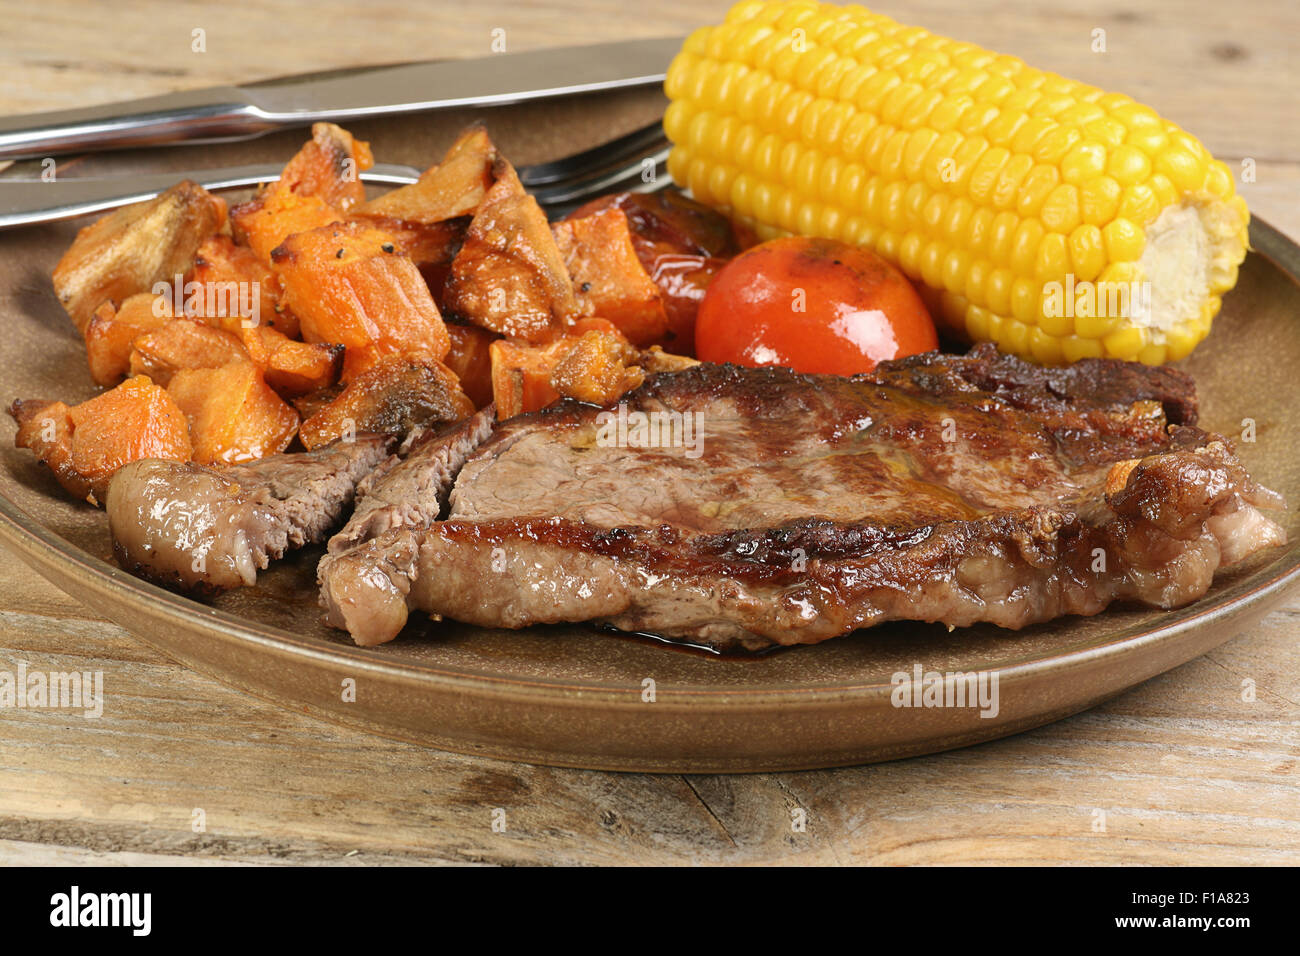 grilled sirloin steak with corn cob and sweet potato Stock Photo